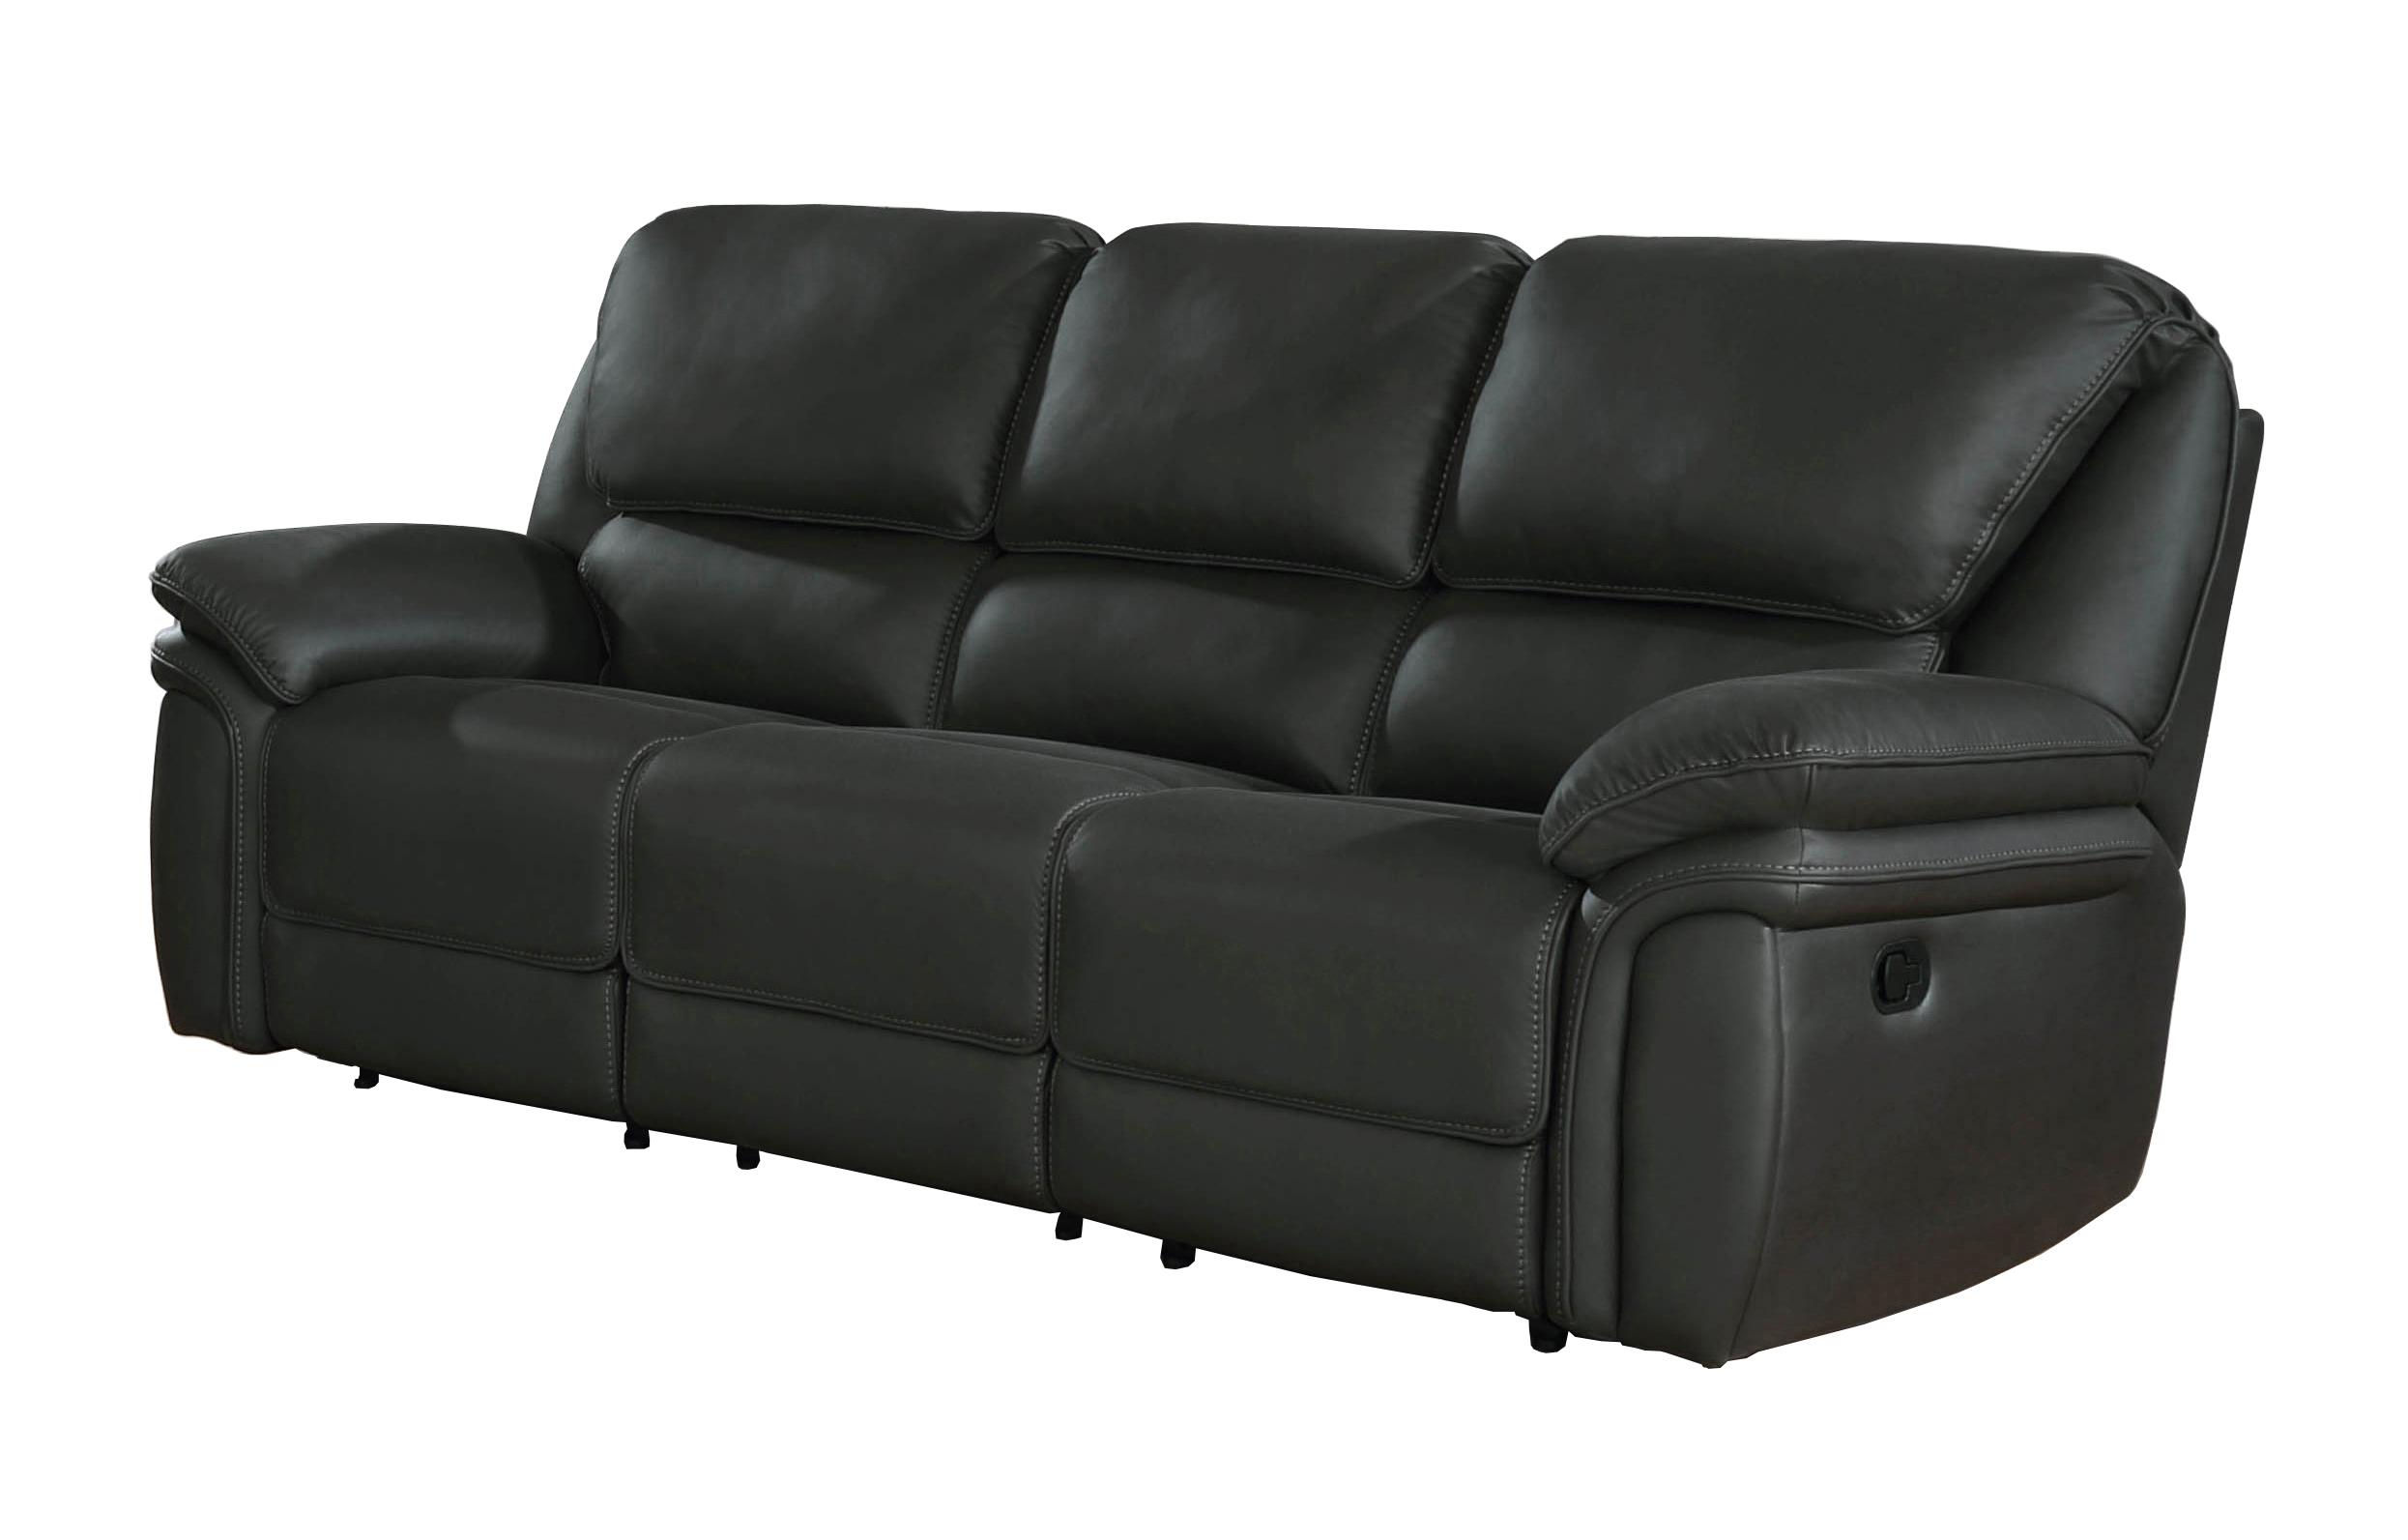 Transitional Motion Sofa 651344 Breton 651344 in Charcoal 